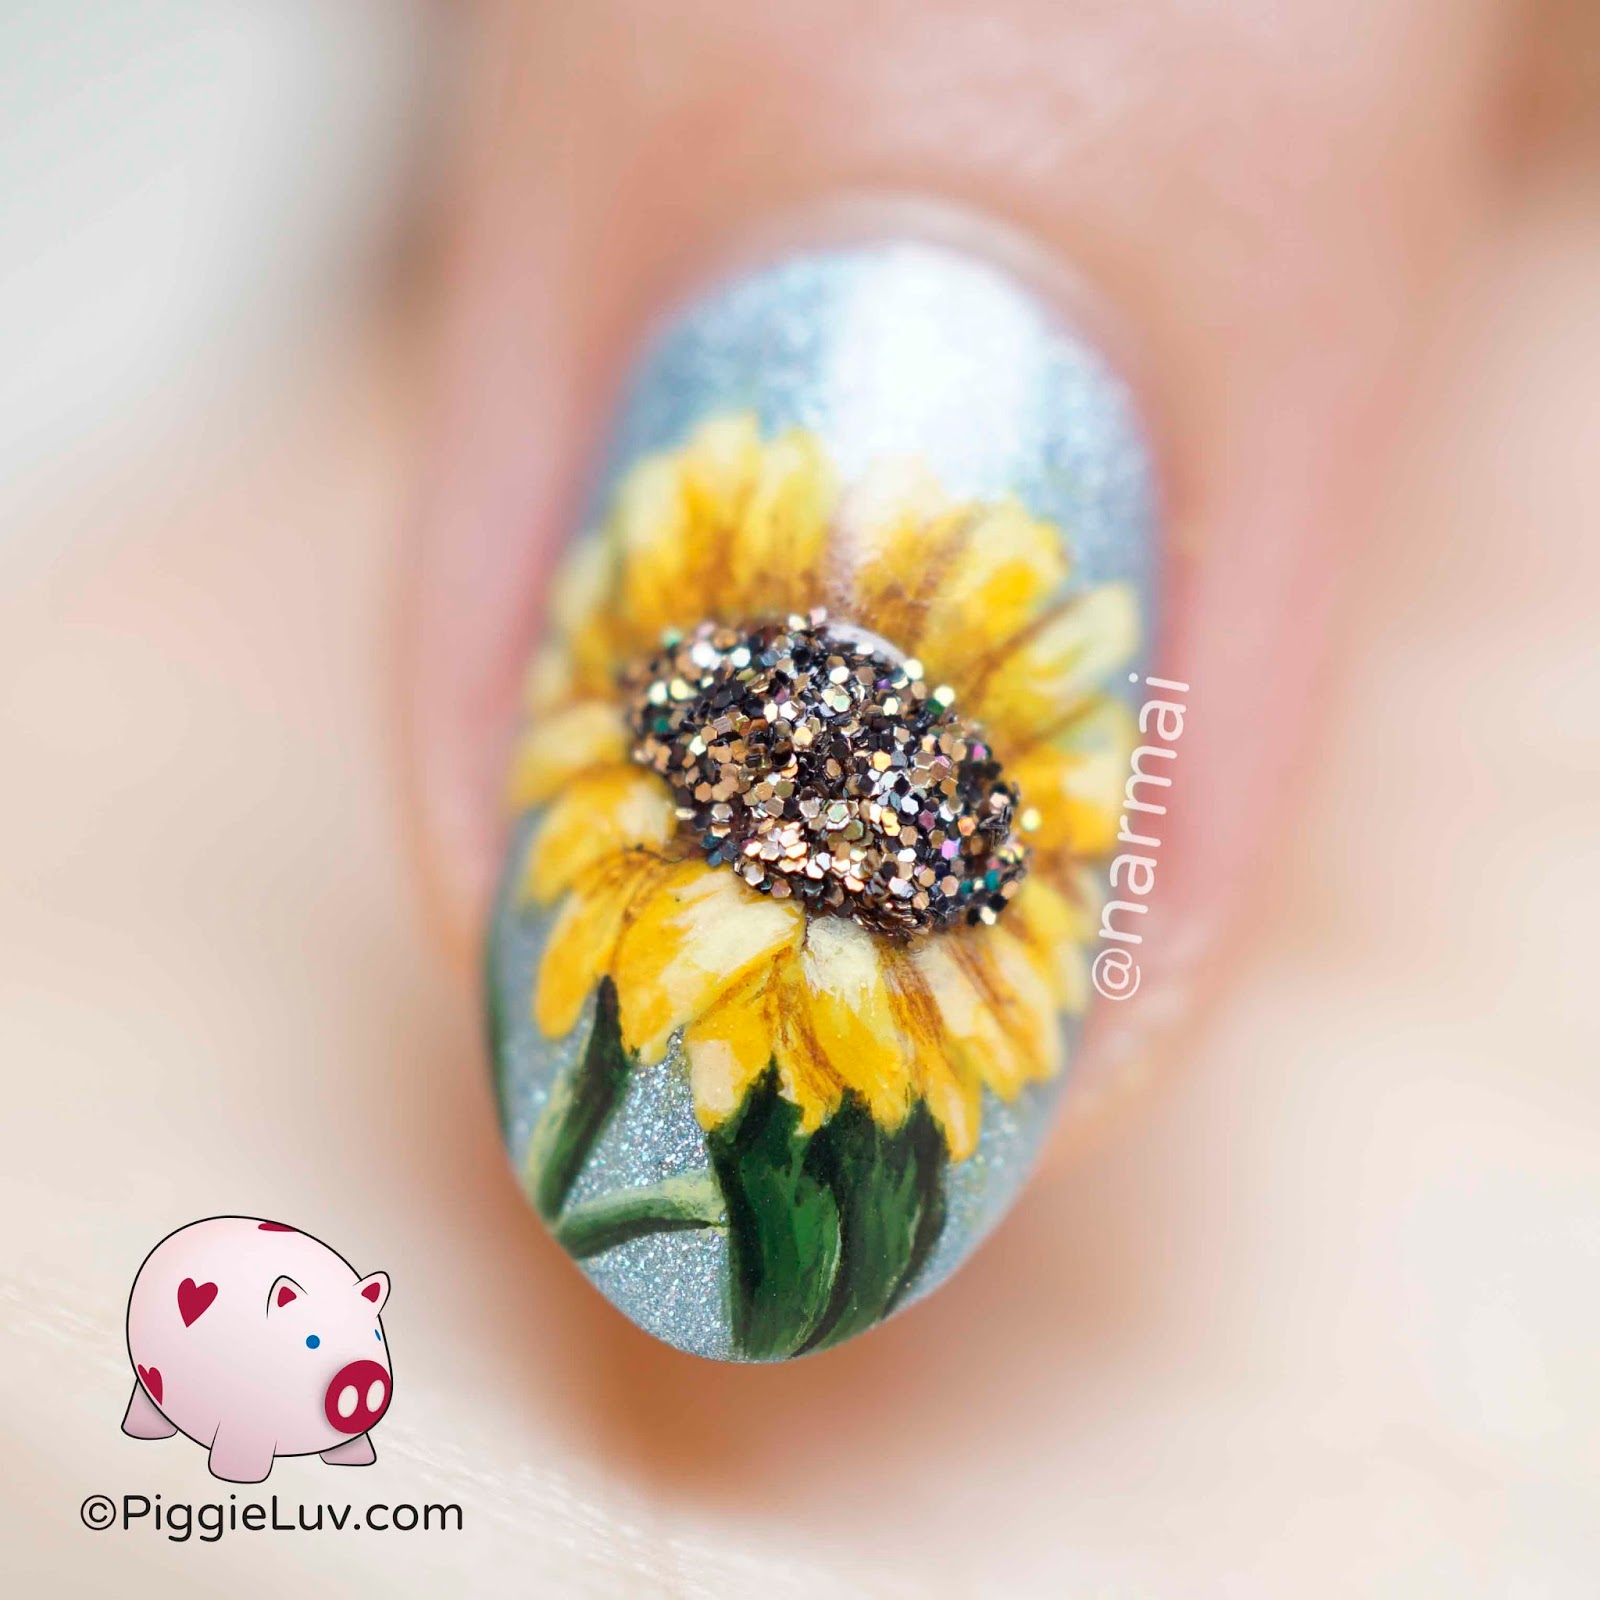 Amazon.com : Sunflower Nail Art Decals : Beauty & Personal Care